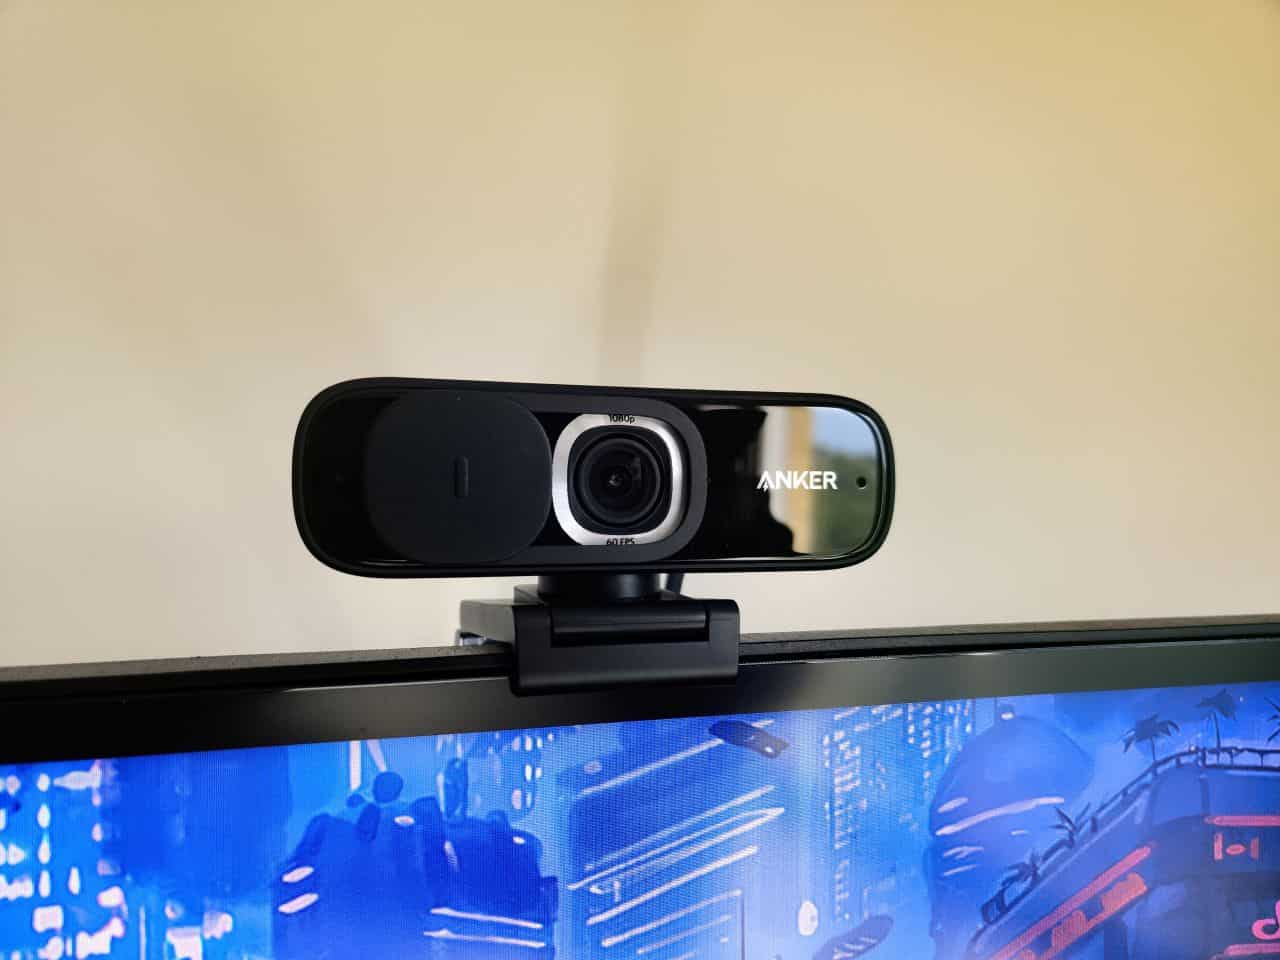 Anker PowerConf C300 is better than my wife's webcam